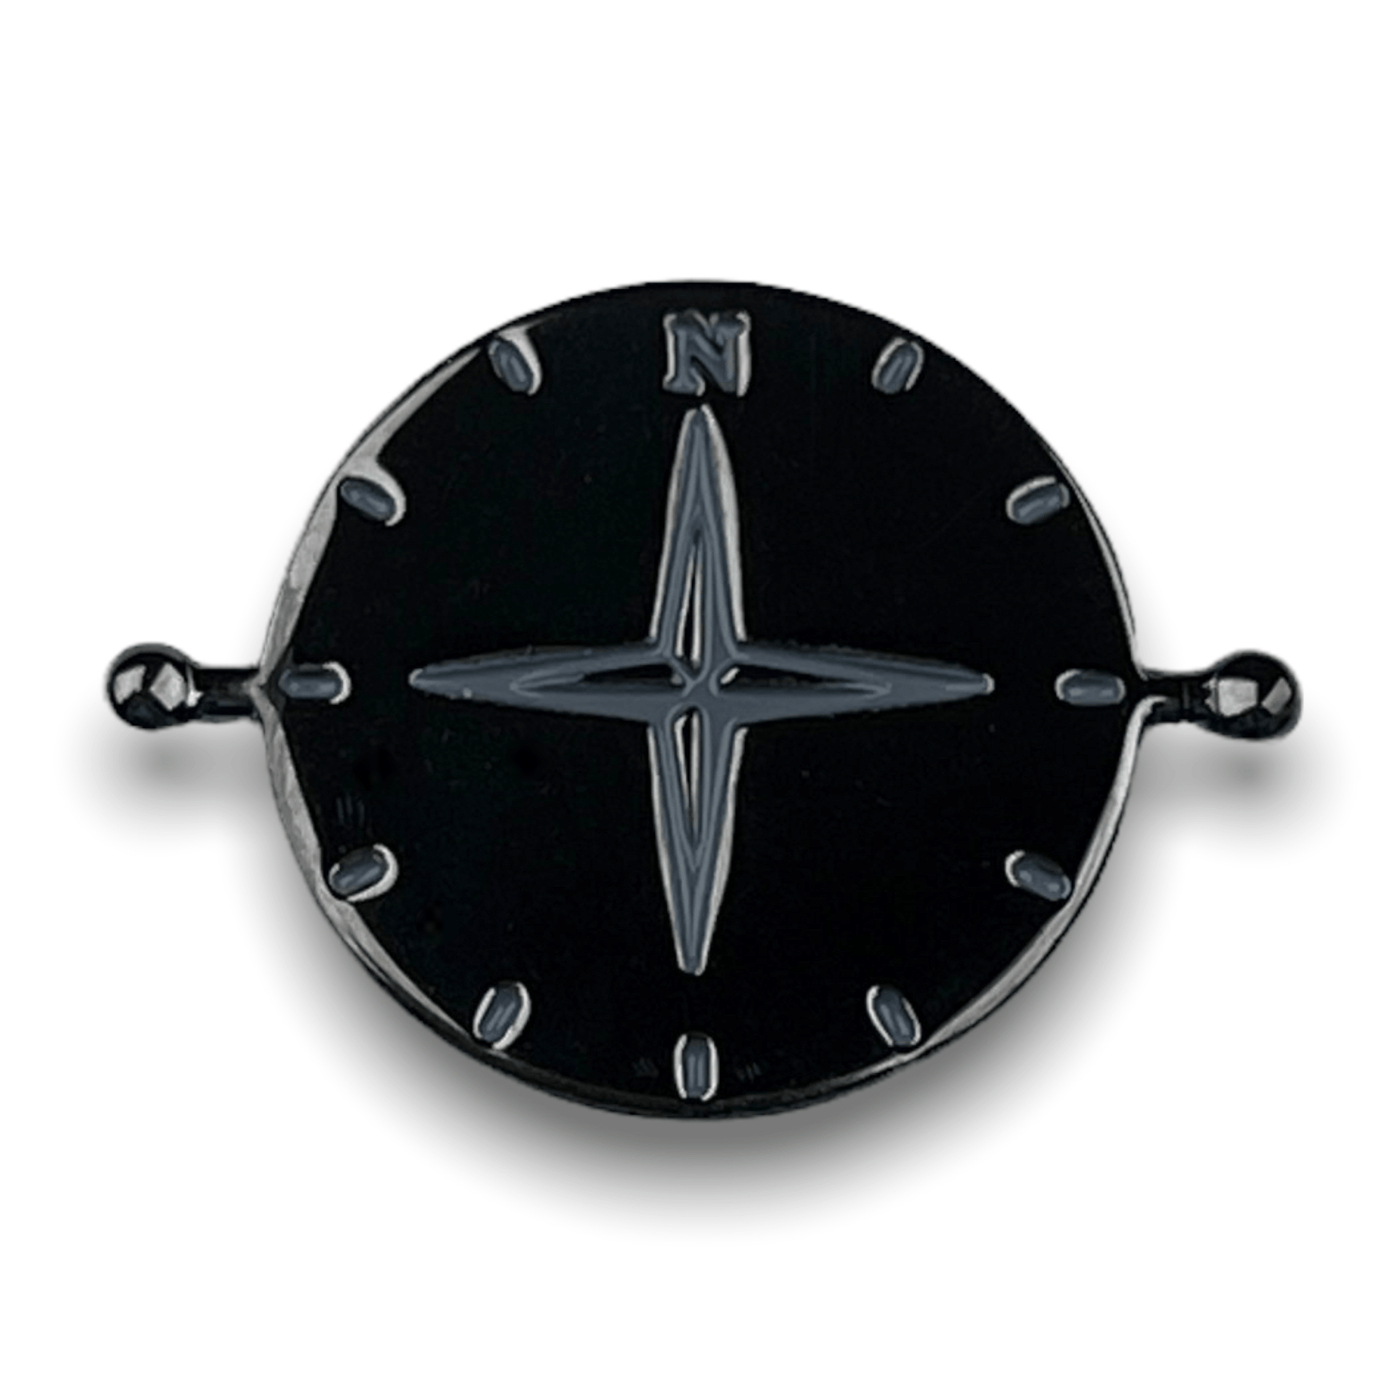 Compass Symbol Element (spin to combine)